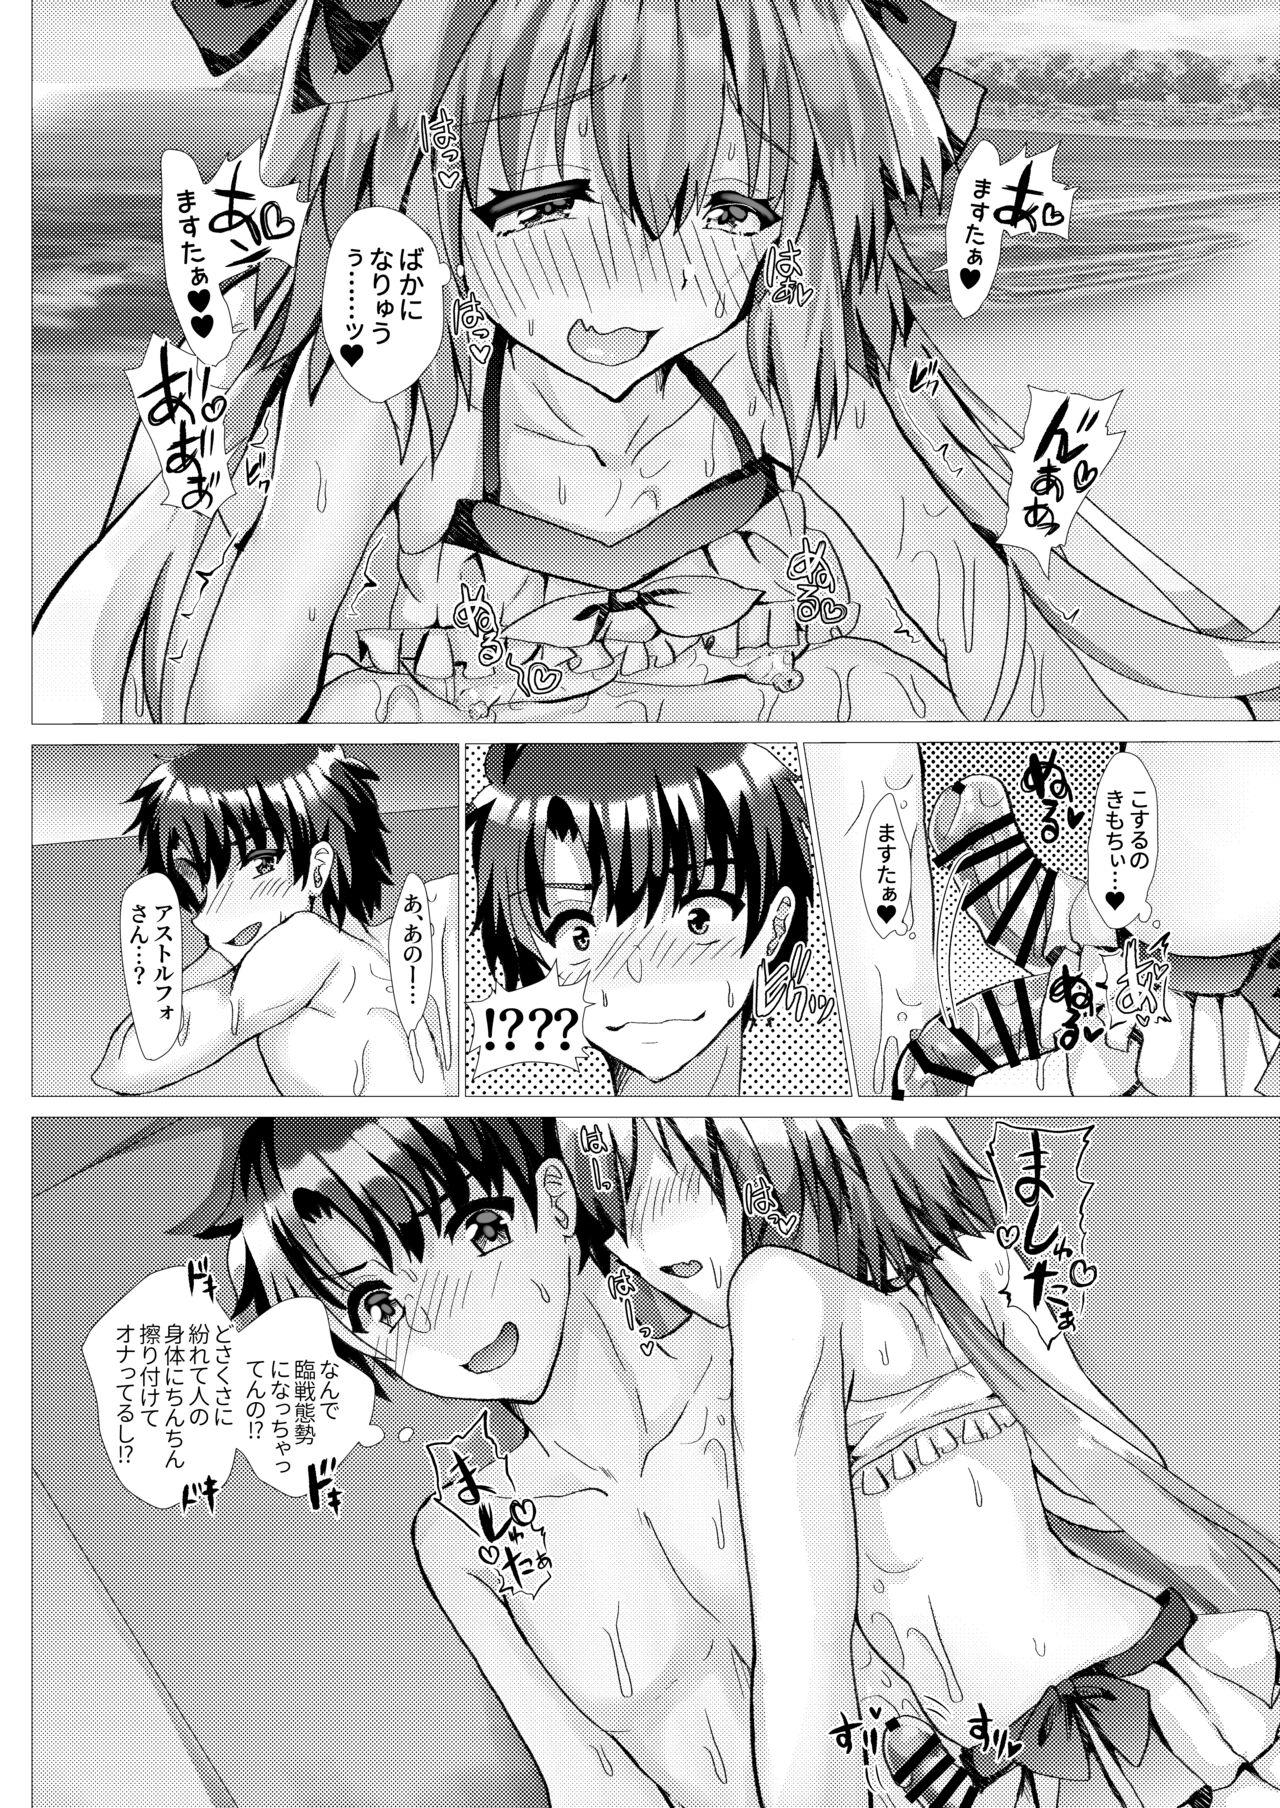 Sex Party Astolfo to Summer Vacation + Omake - Fate grand order Caught - Page 7